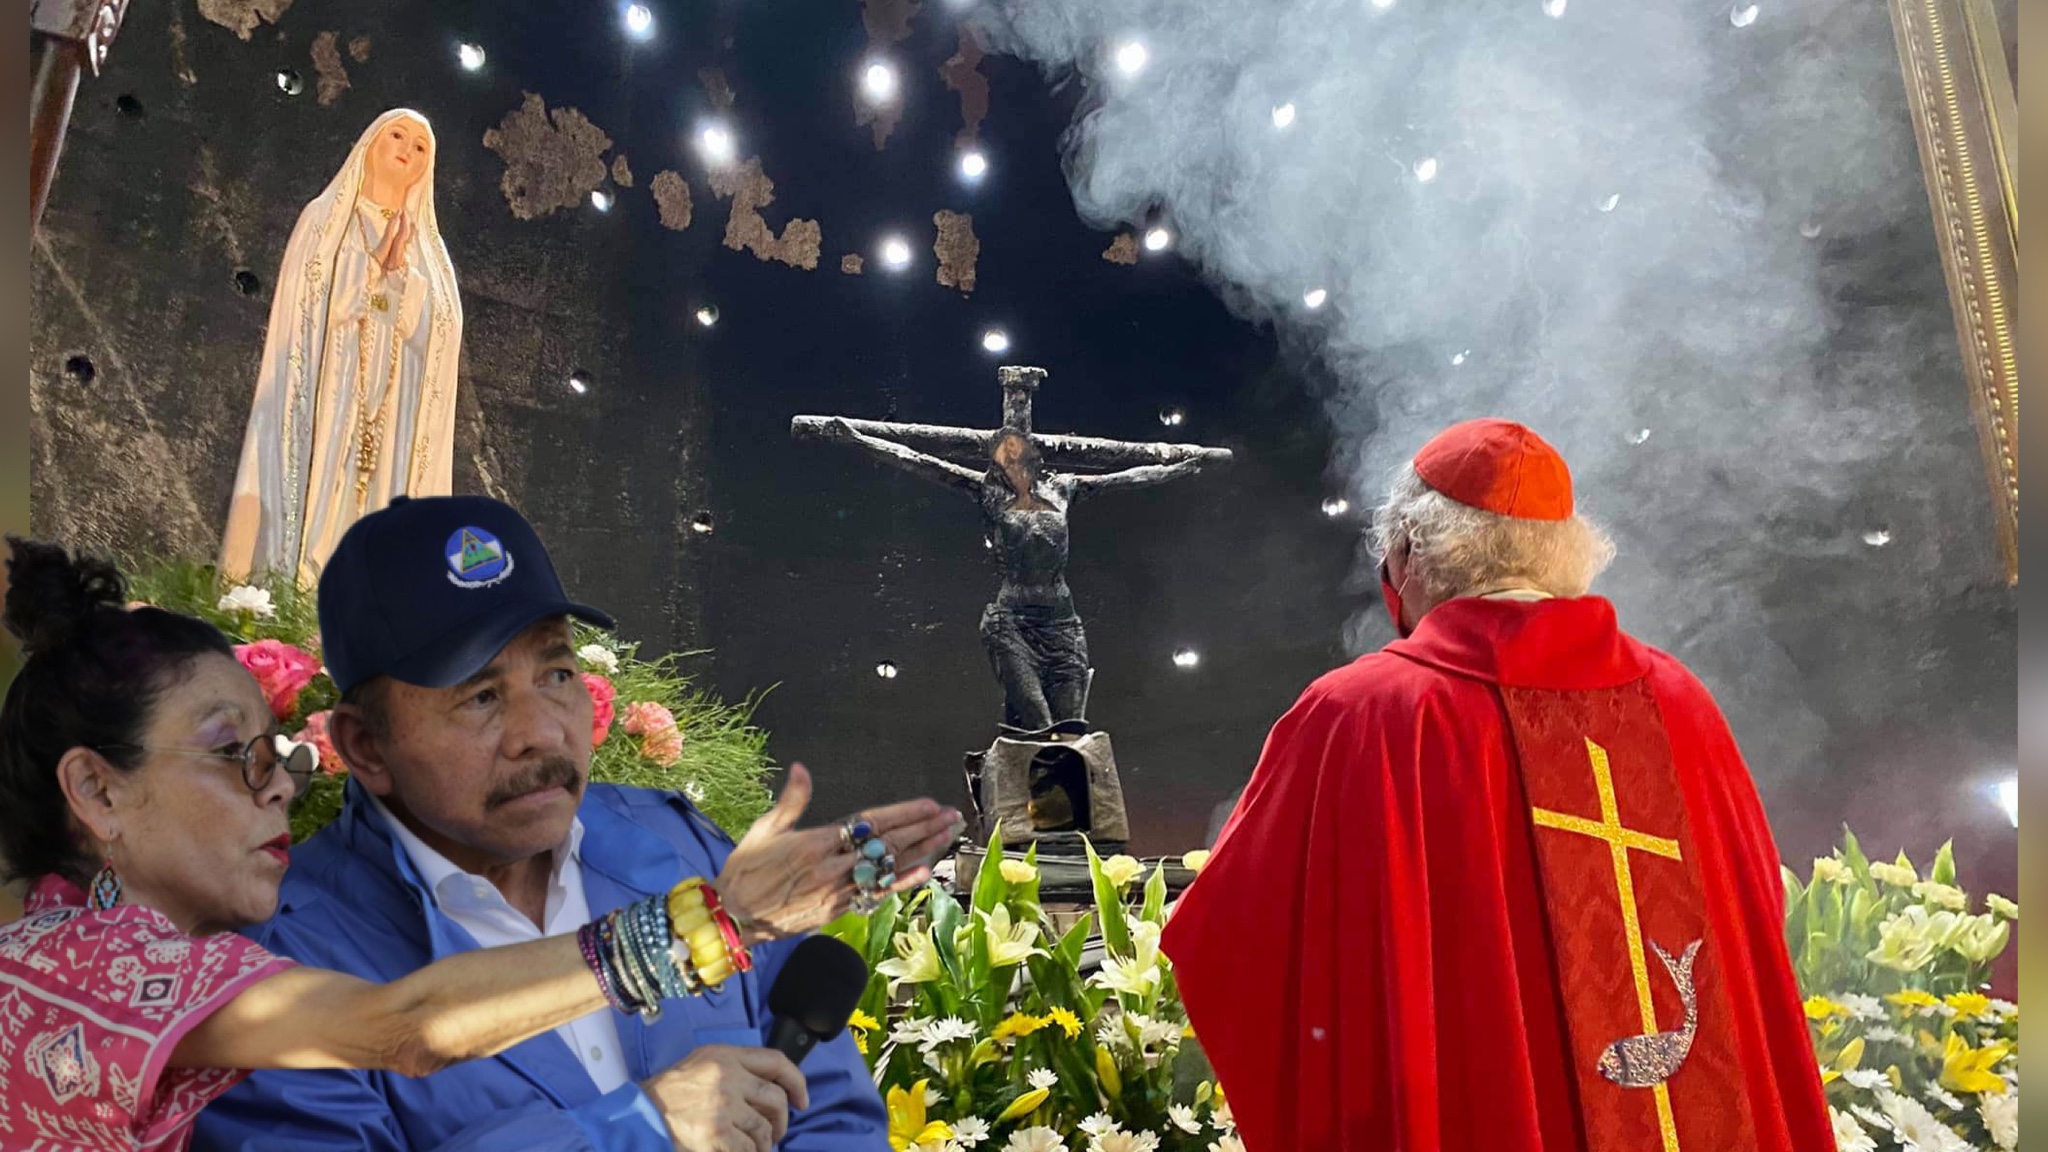 Ortega and Murillo intensify the war against the Catholic Church: Attacks rose by 460%